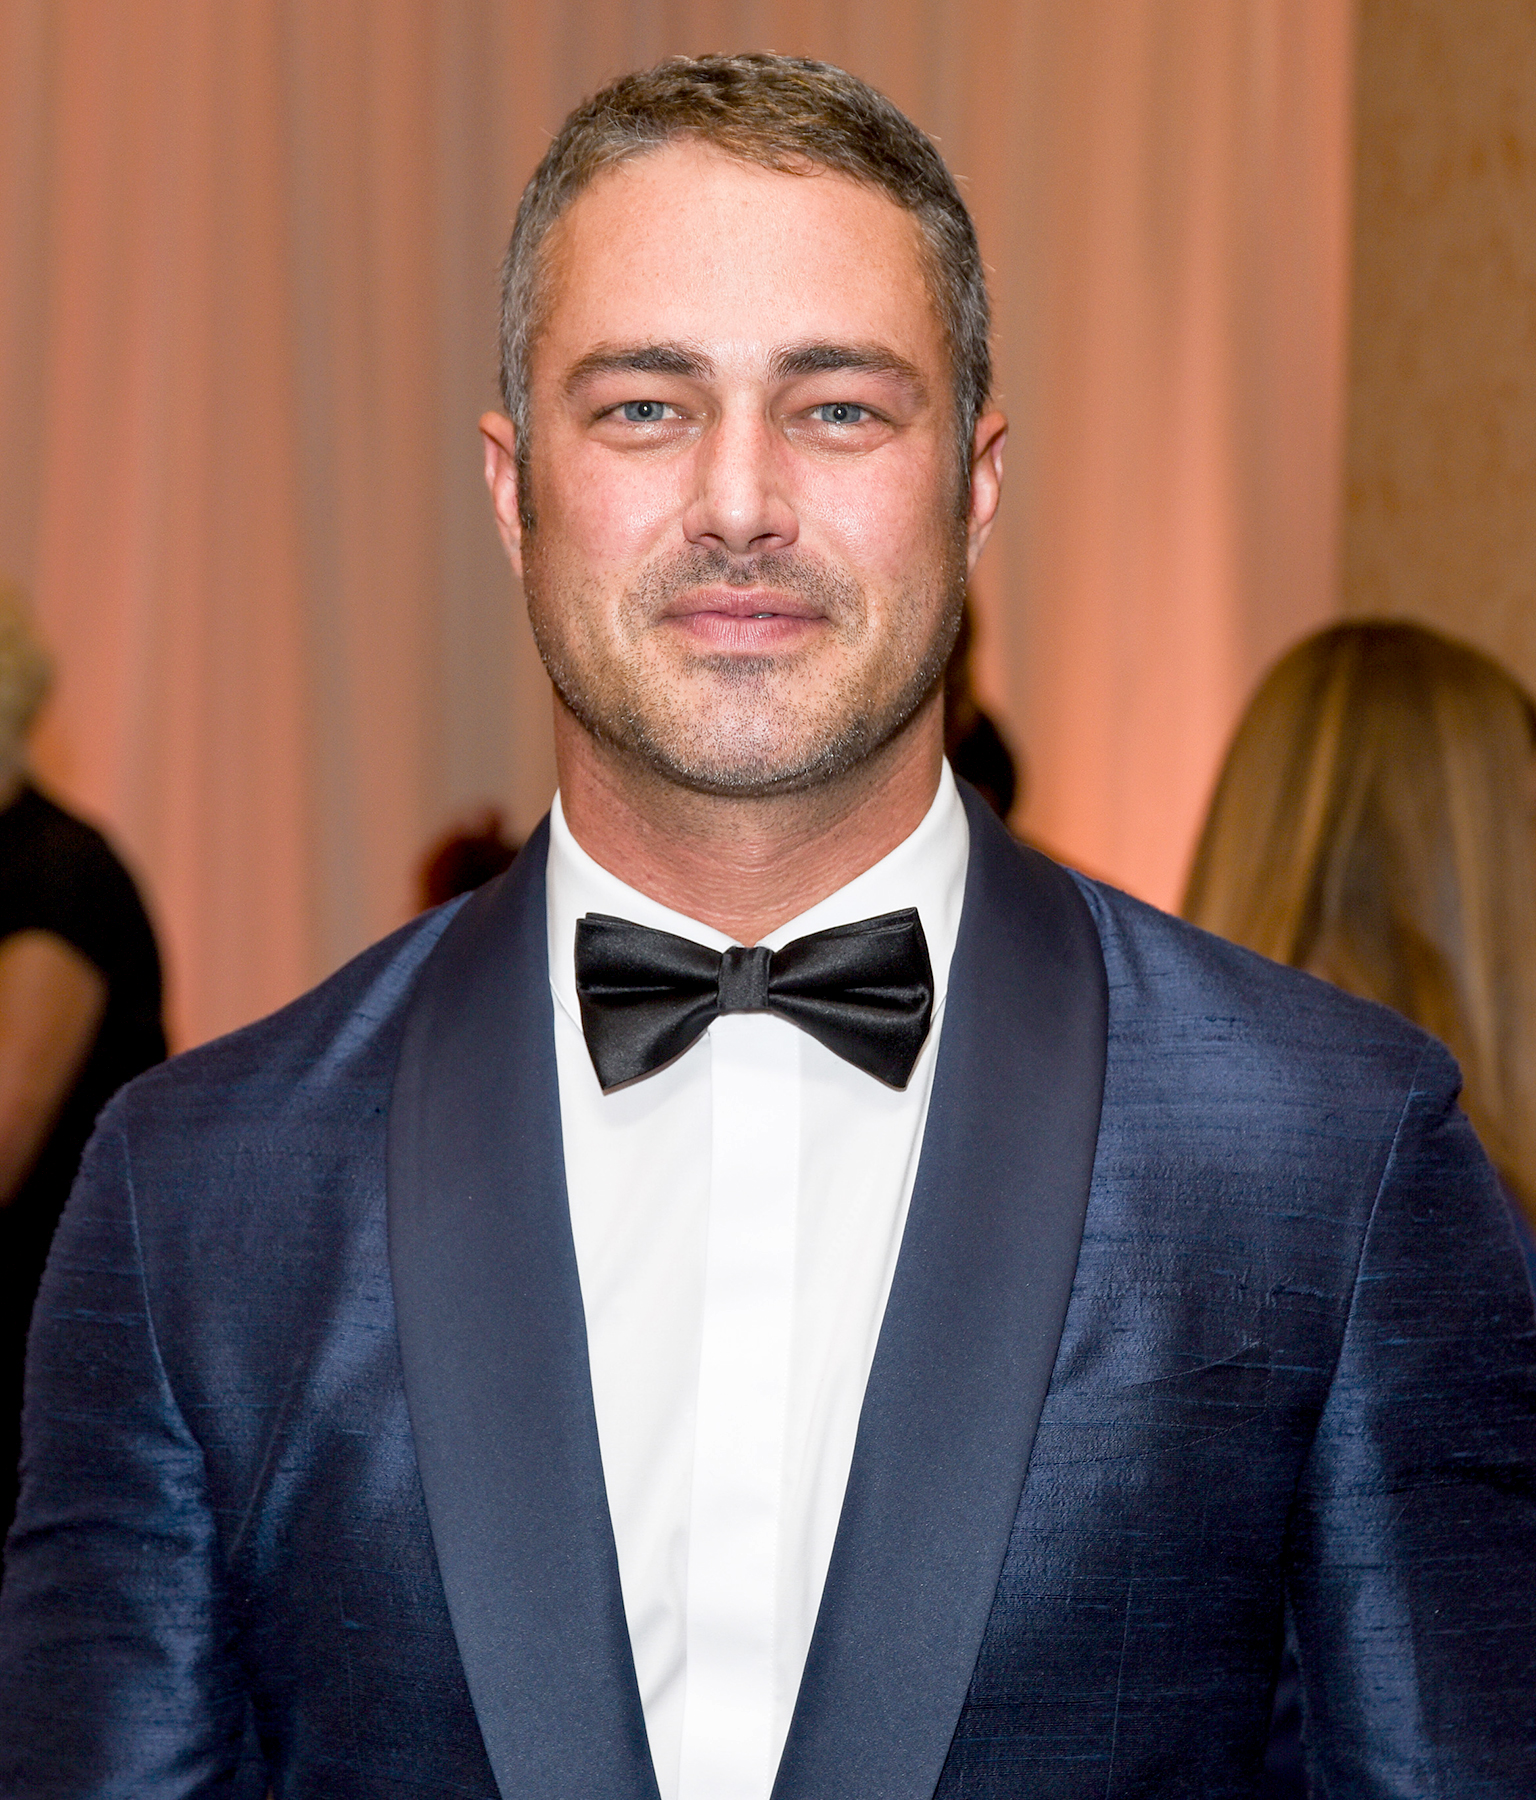 taylor kinney dating who